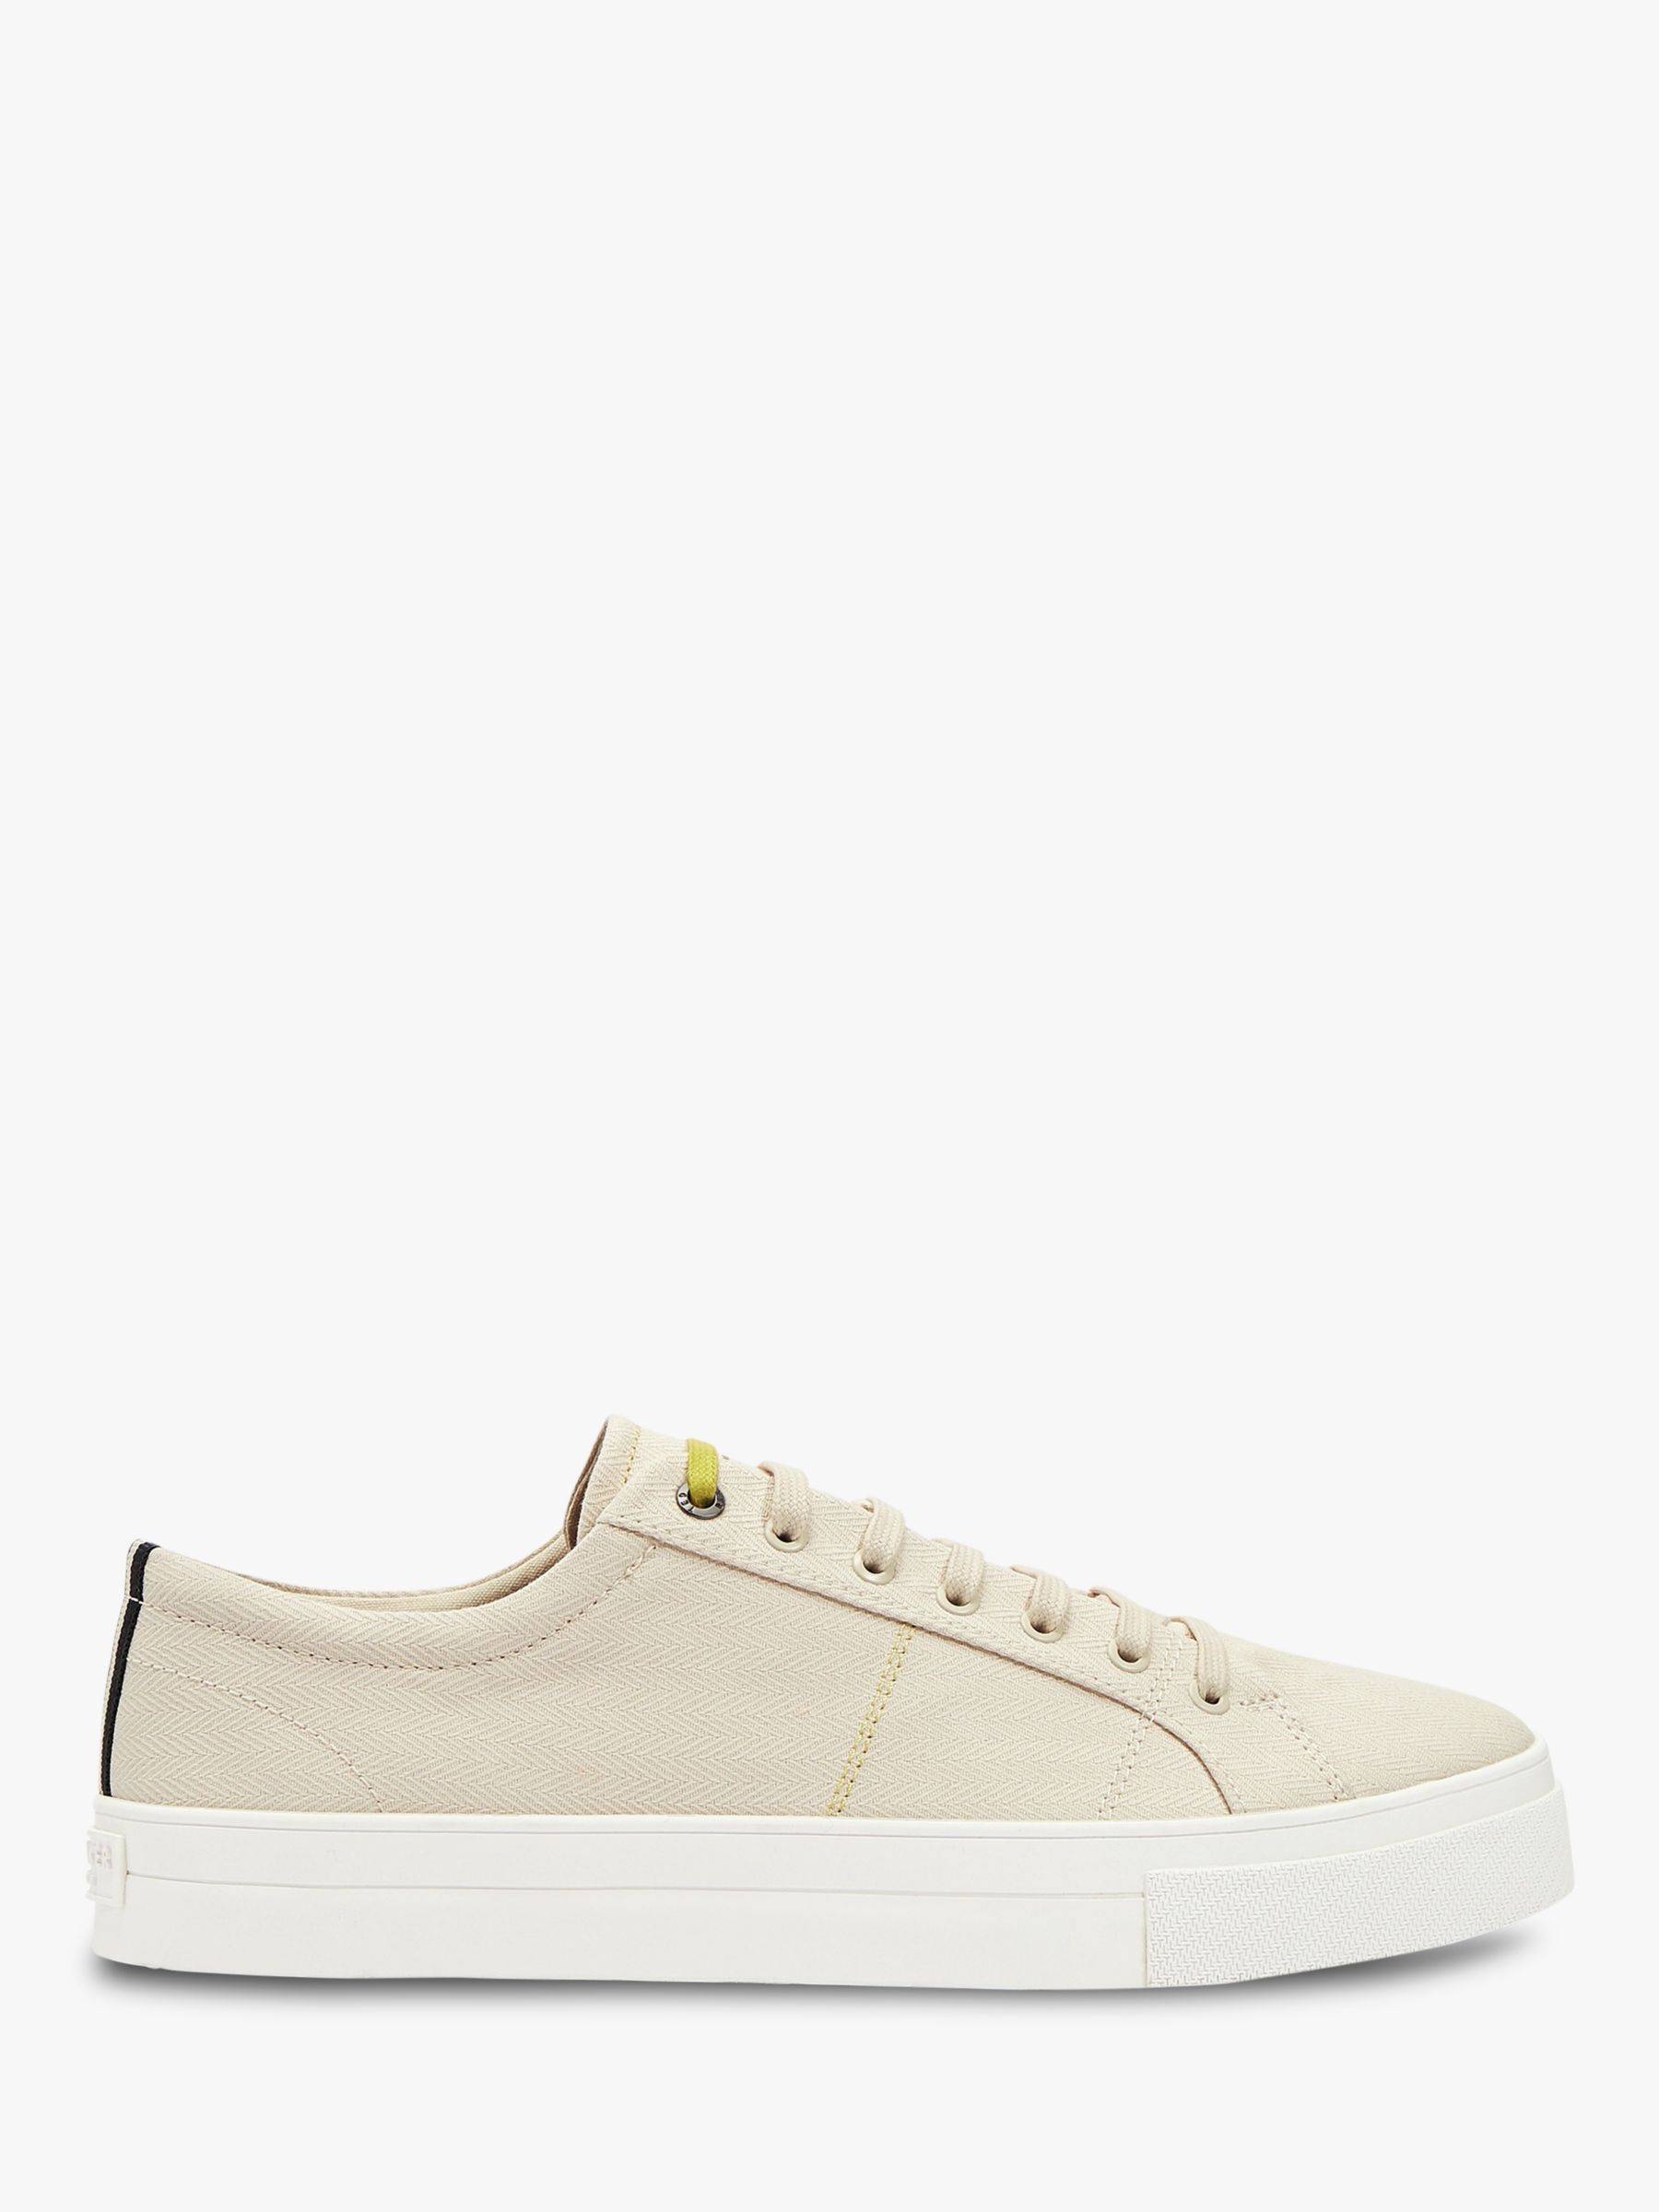 Ted Baker Eshron Canvas Plimsoll Trainers, White